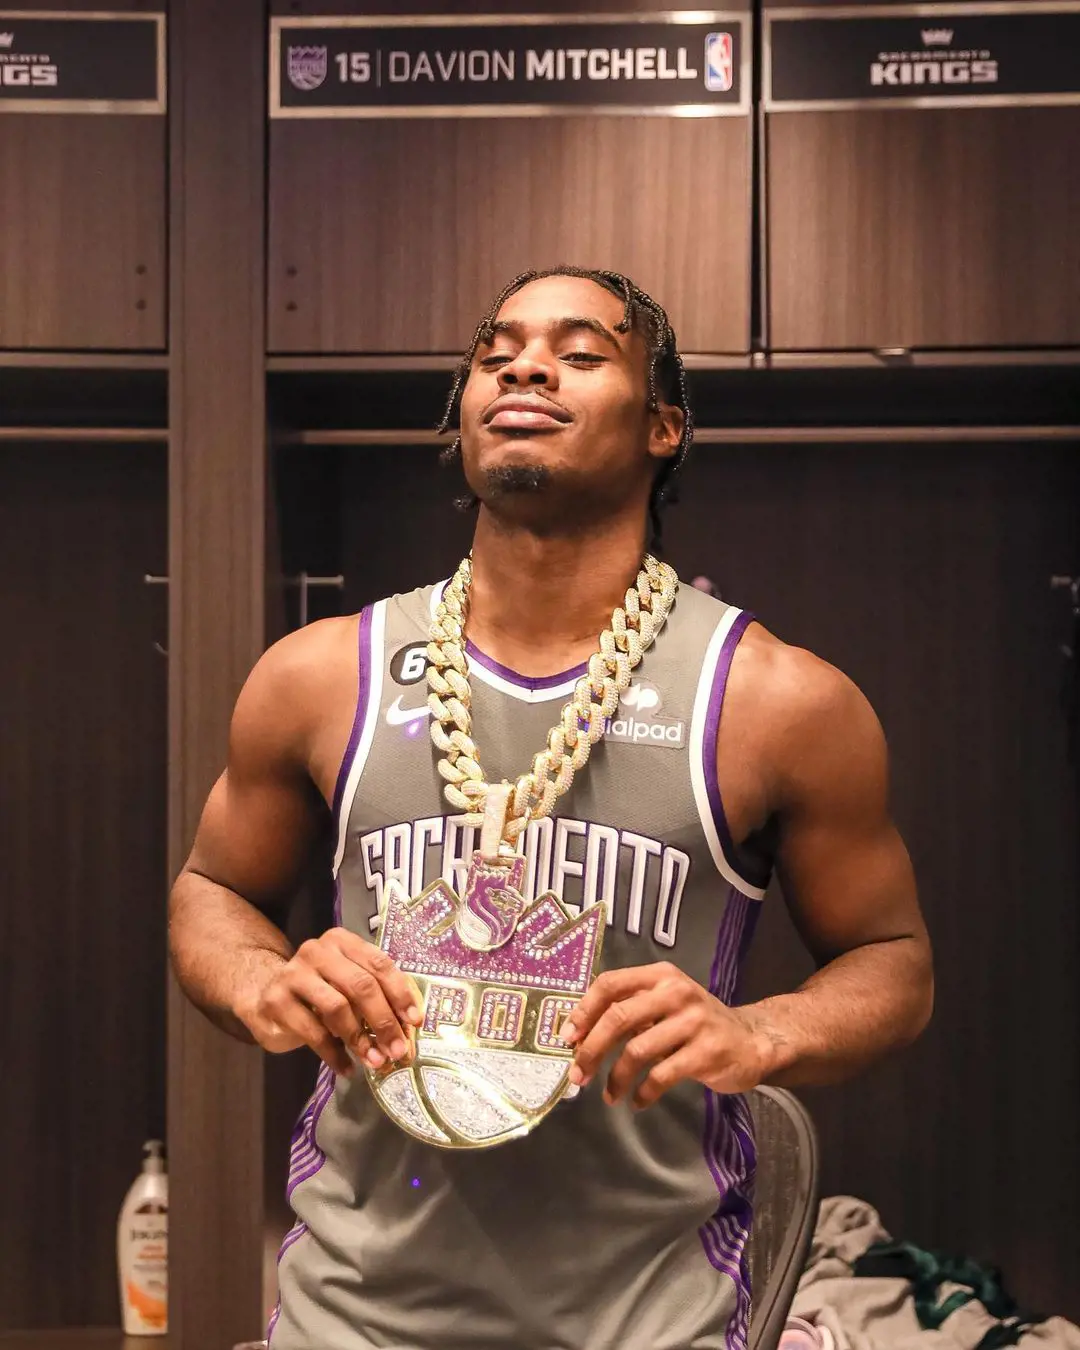 Davion Mitchell helped the Kings win the 2021 NBA Summer League Championship, 